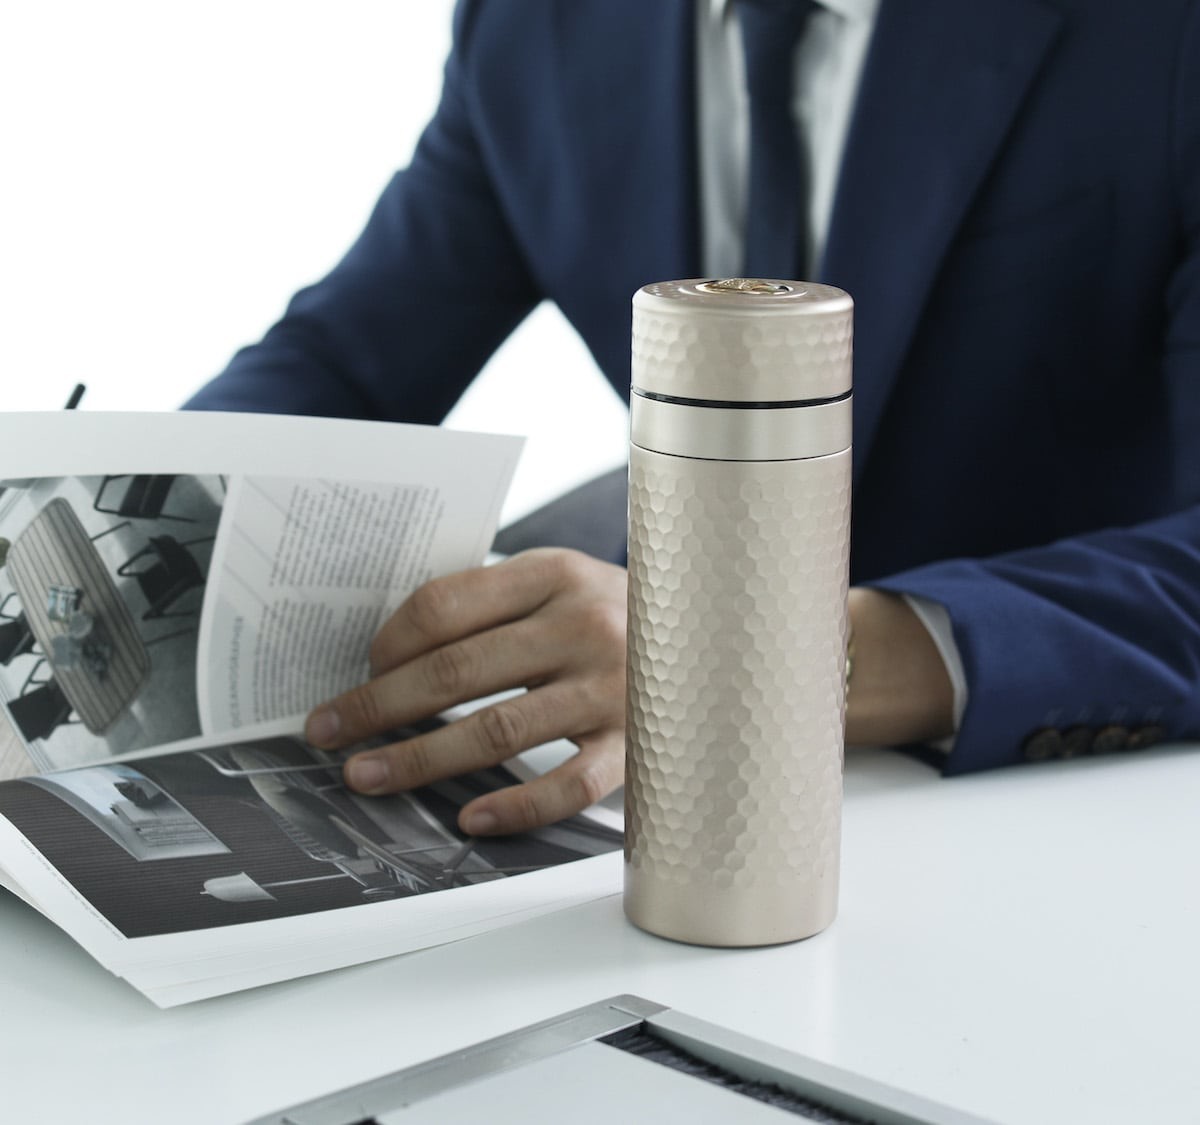 Acera Harmony Collection advanced travel mugs have stainless steel & ceramic layers